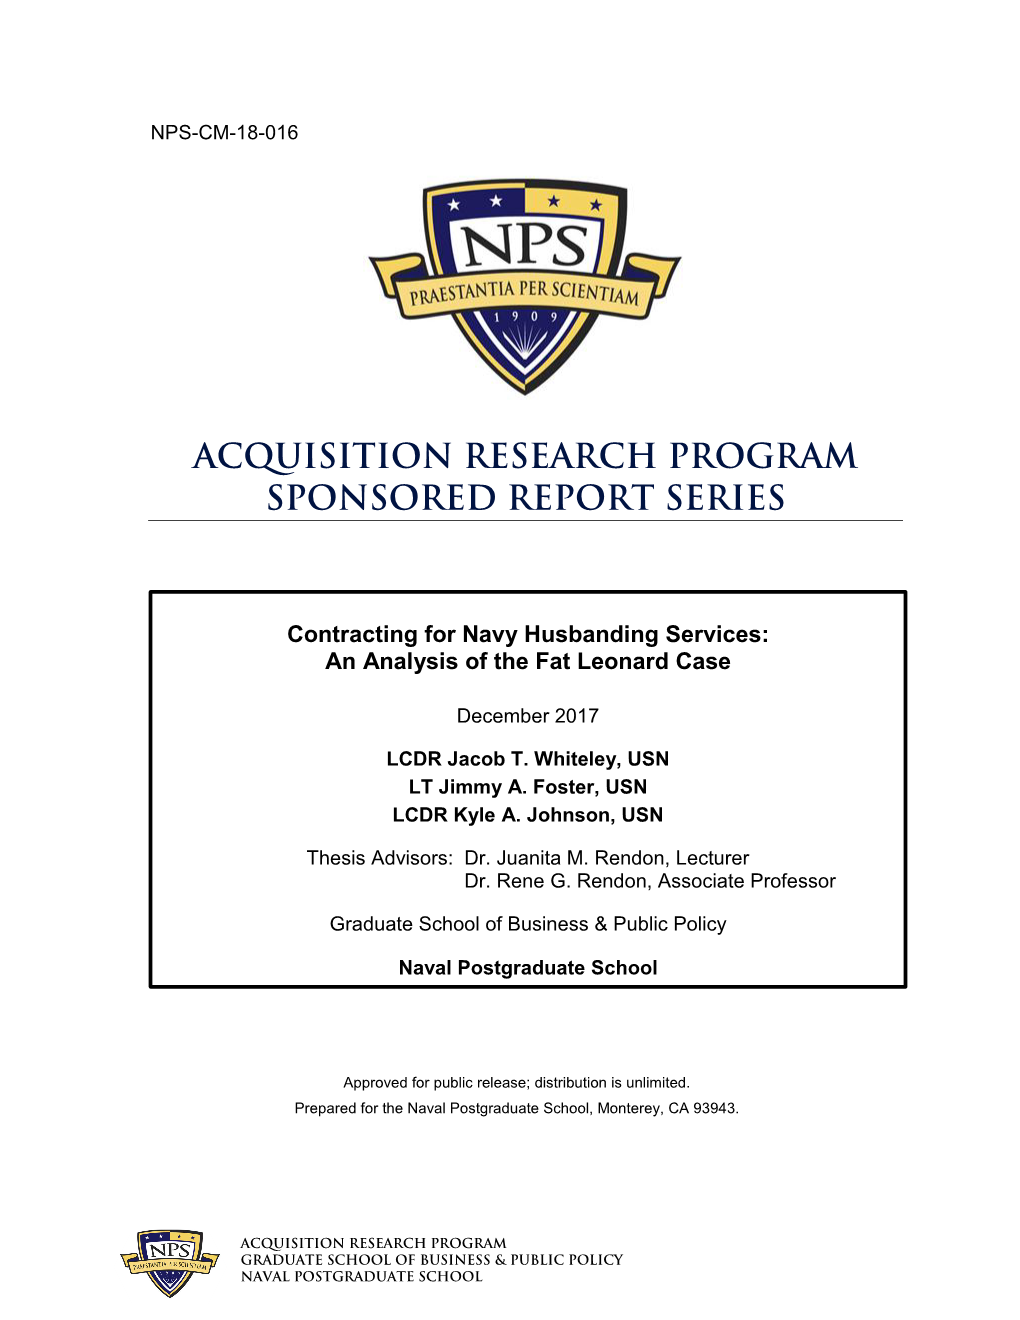 Contracting for Navy Husbanding Services: an Analysis of the Fat Leonard Case